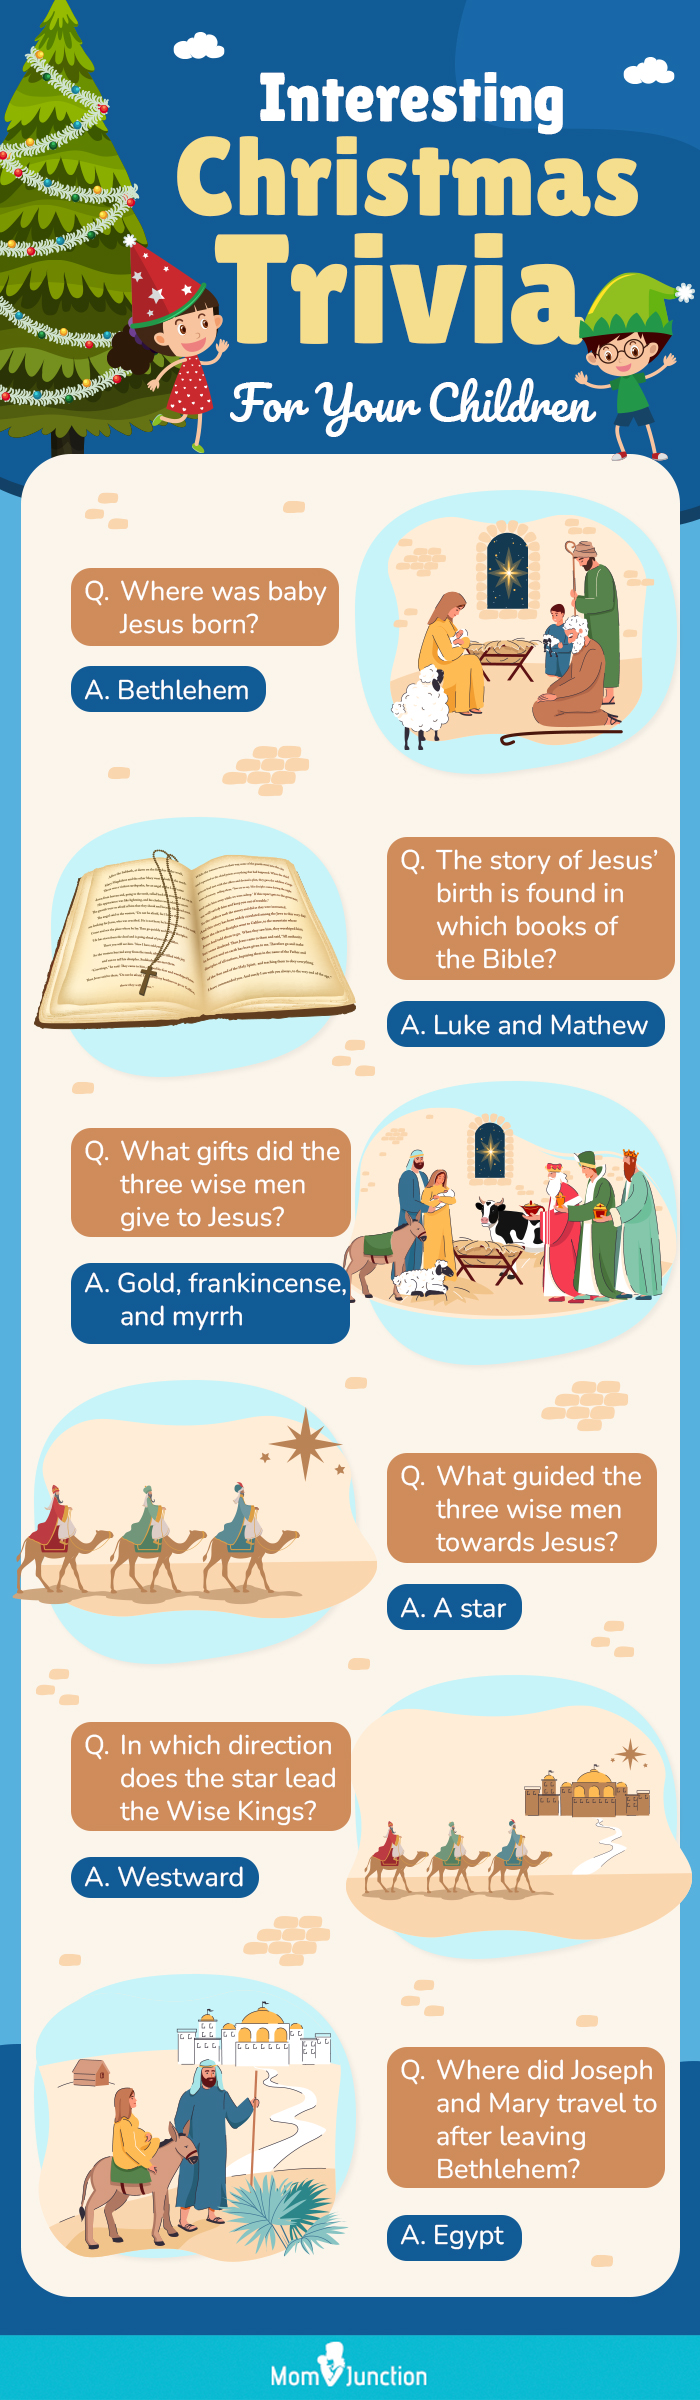 interesting christmas trivia for your children (infographic)